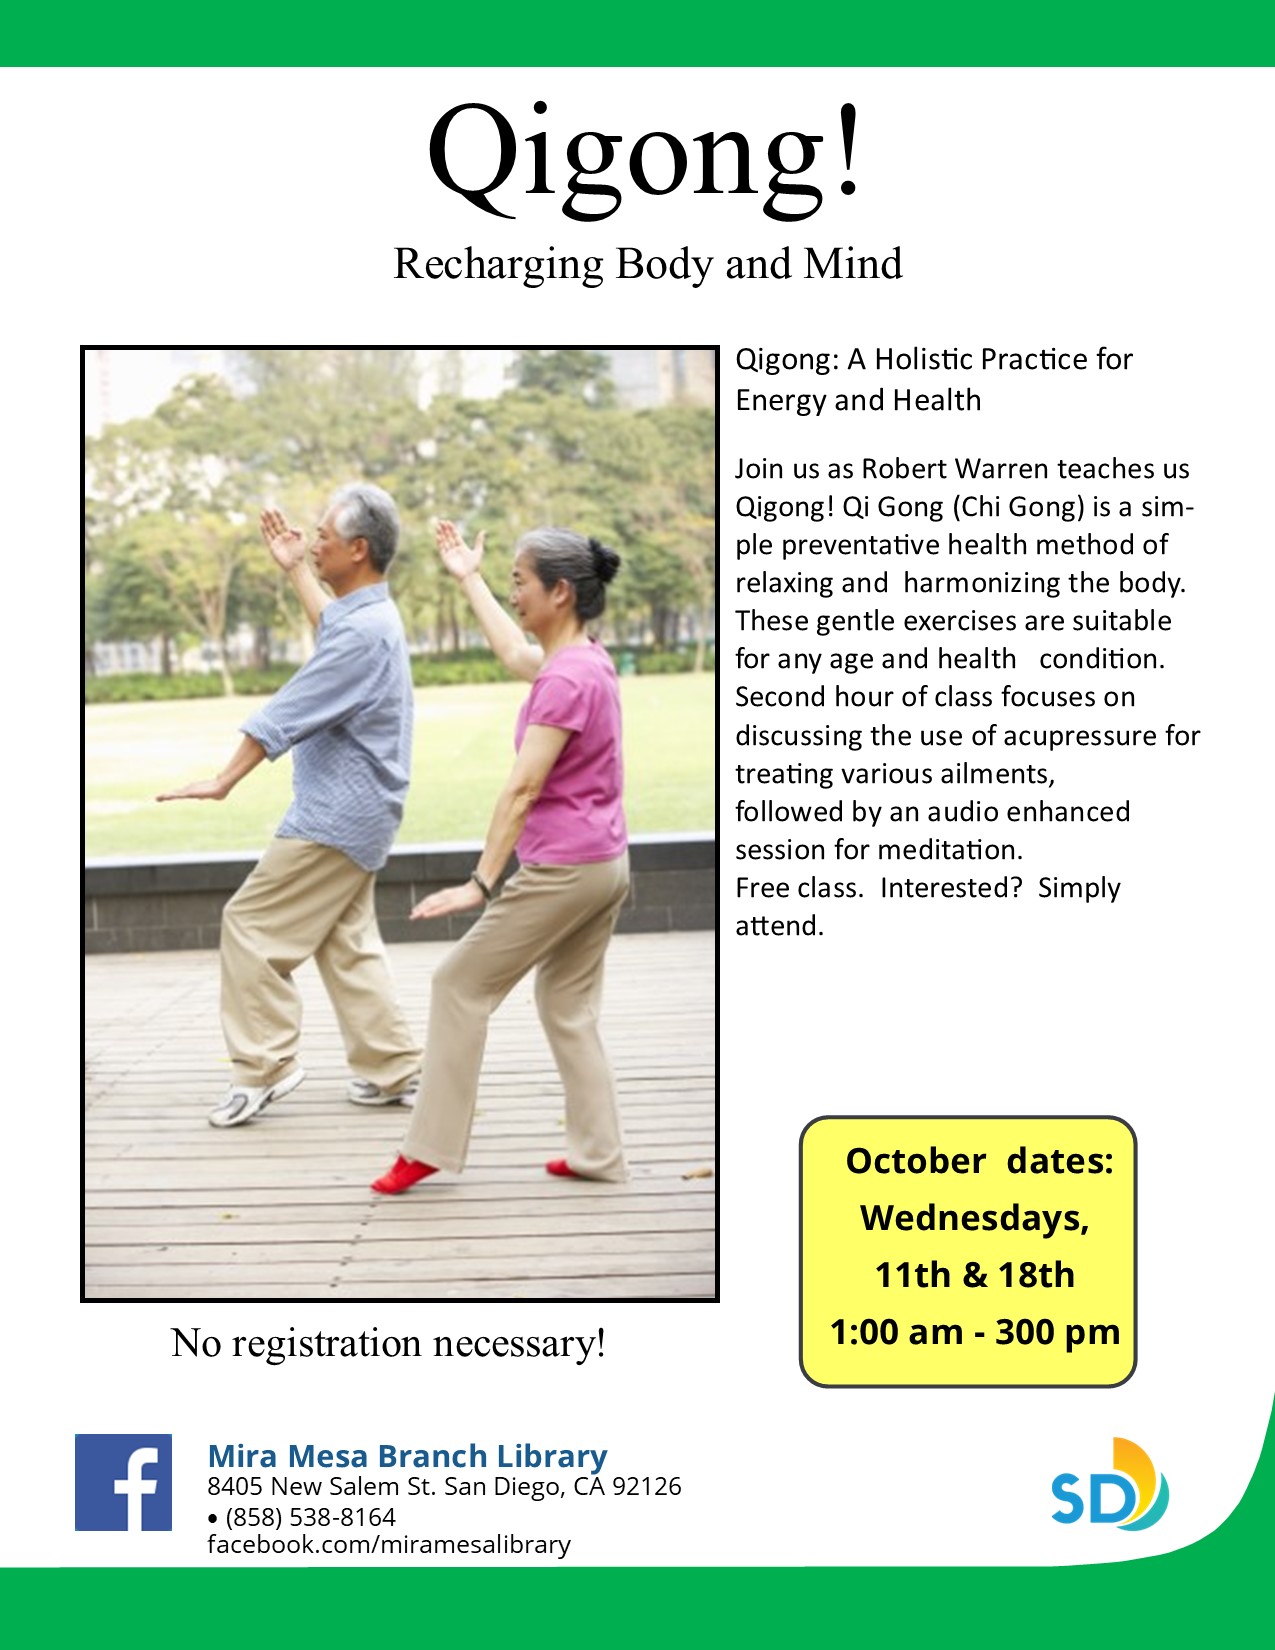 Flyer with class information depicting older couple exercising